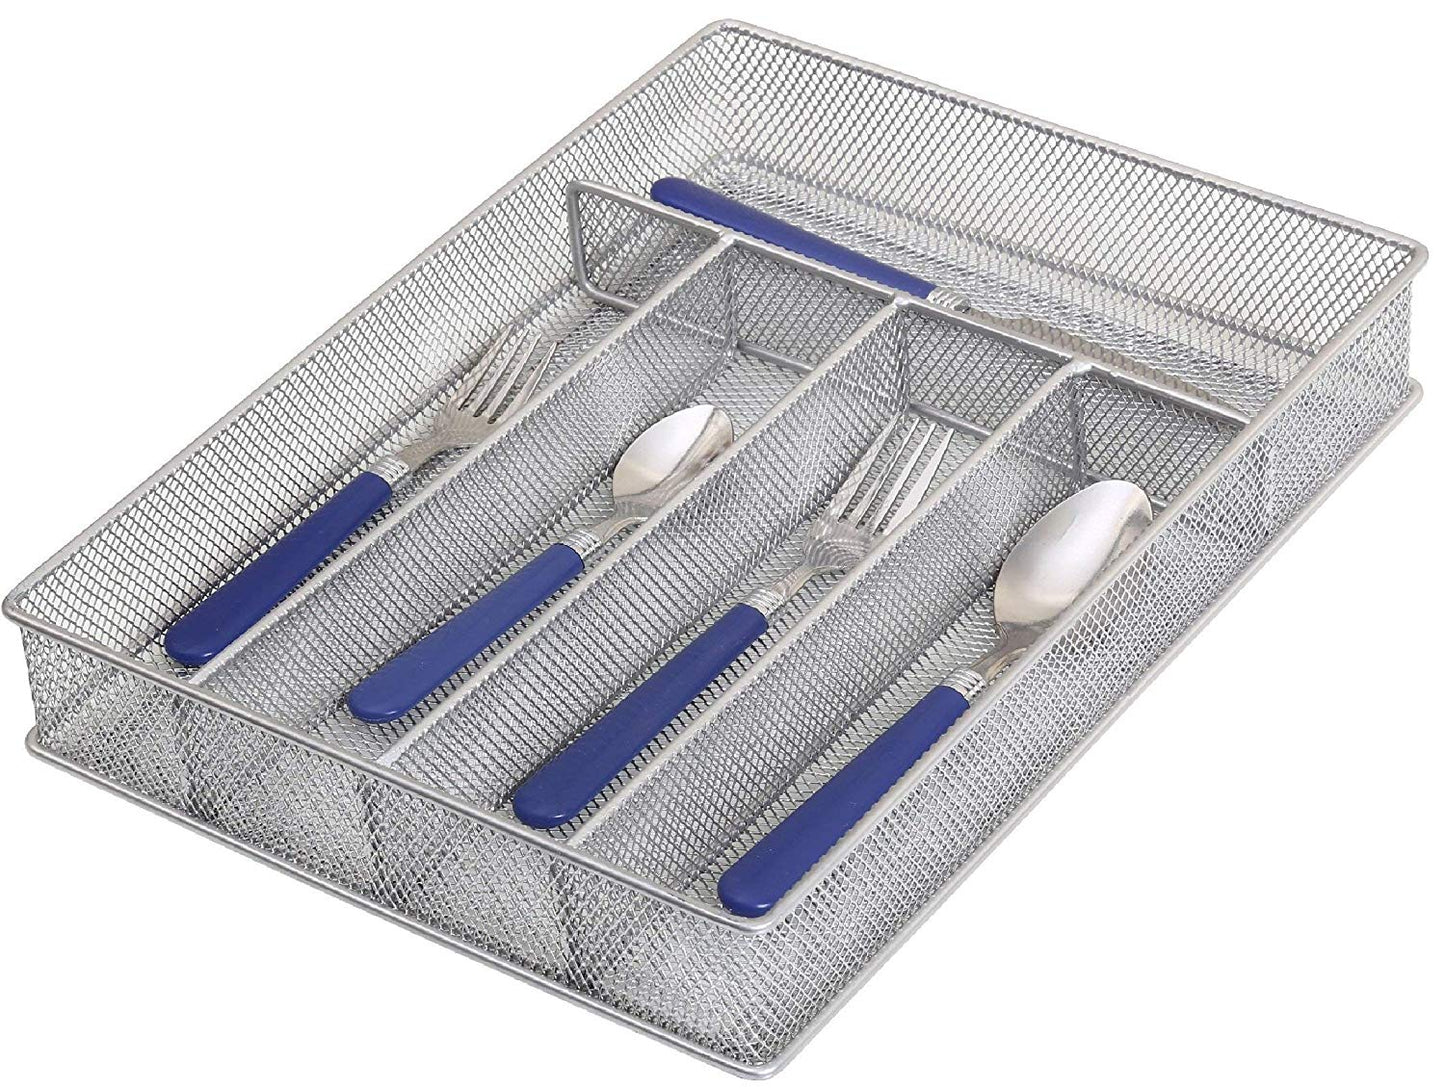 YBM Home In-Drawer Silverware Organizer with Dividers, Kitchen Drawer Organizer with 5 Compartments for Utensils, Cutlery and Office Supplies Storage